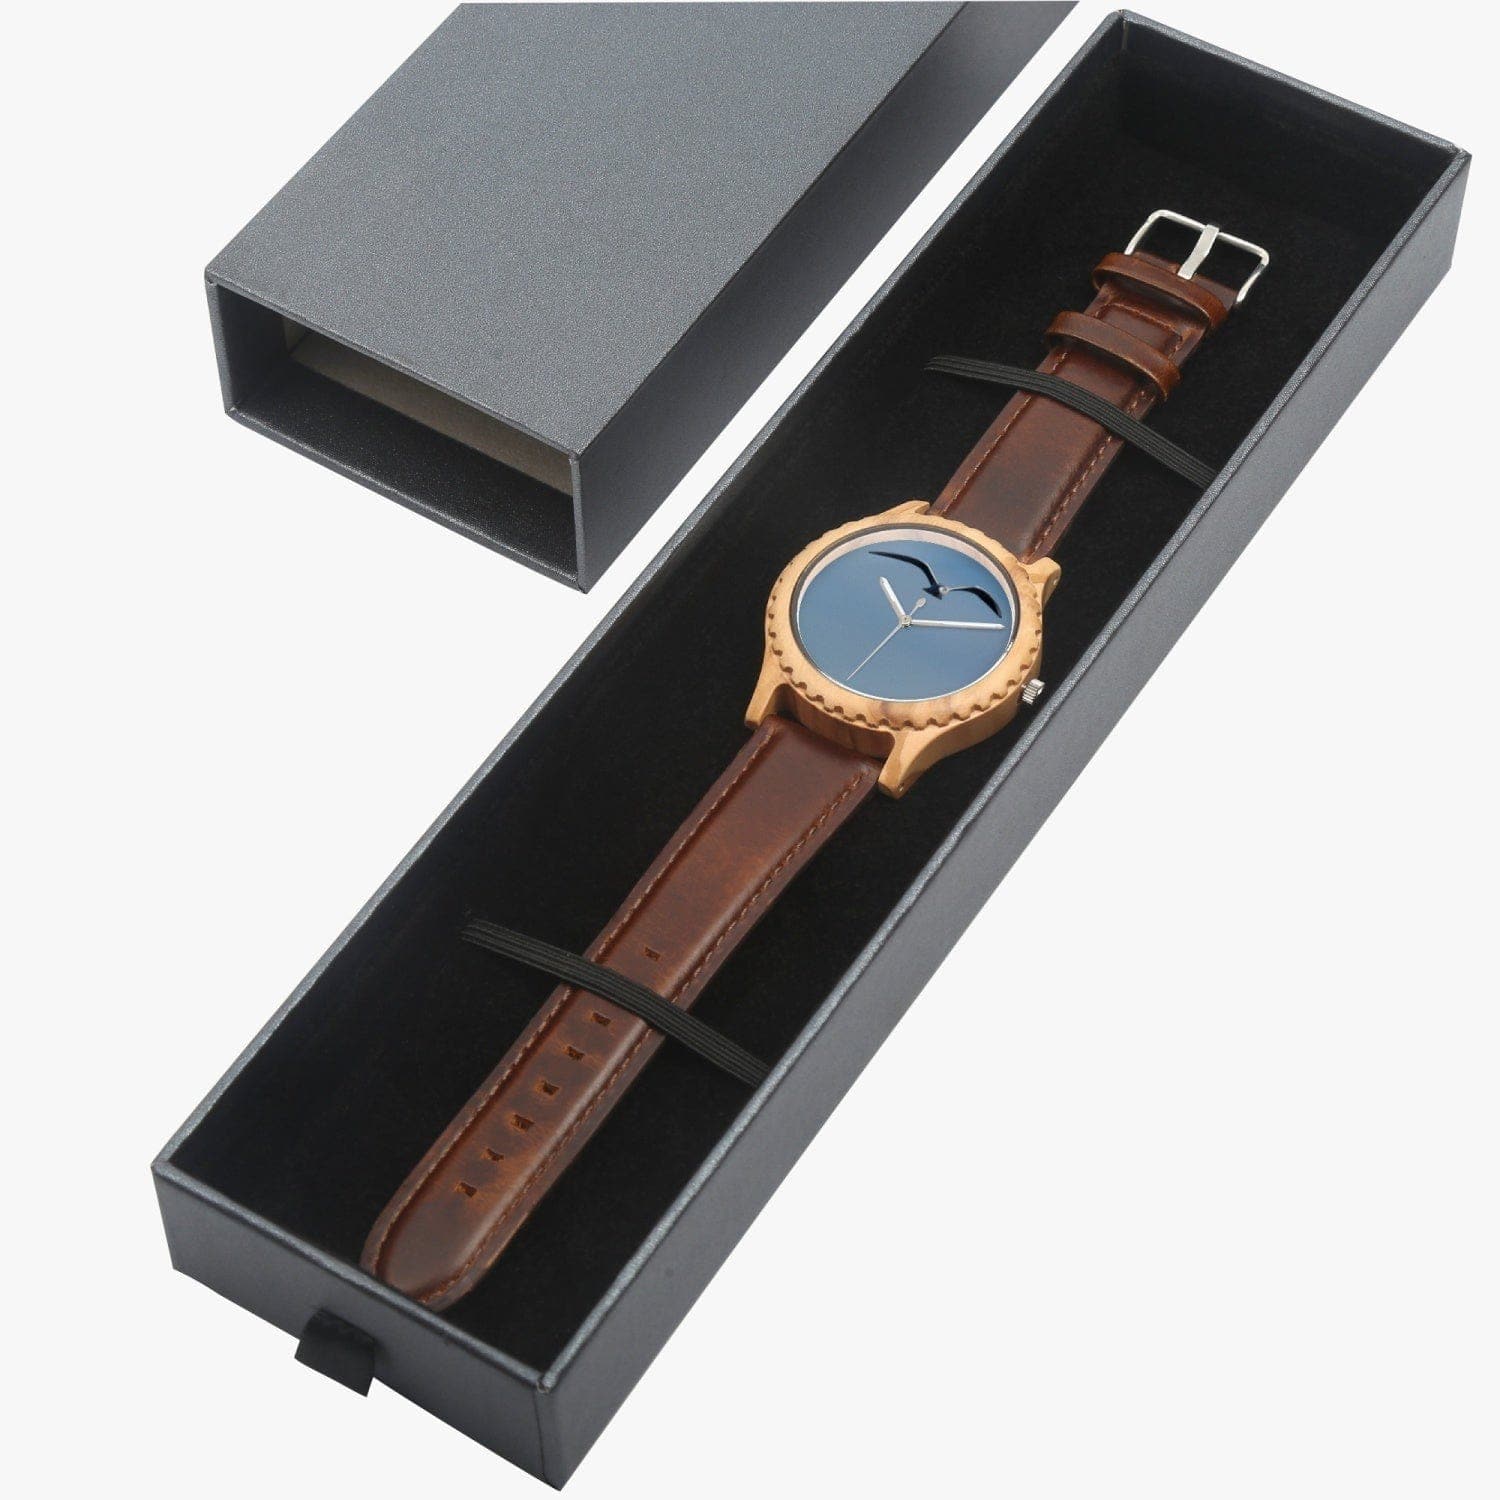 Time slips by. Italian Olive Lumber Wooden Watch - Leather Strap.  Designer watch by Sensus Studio Design